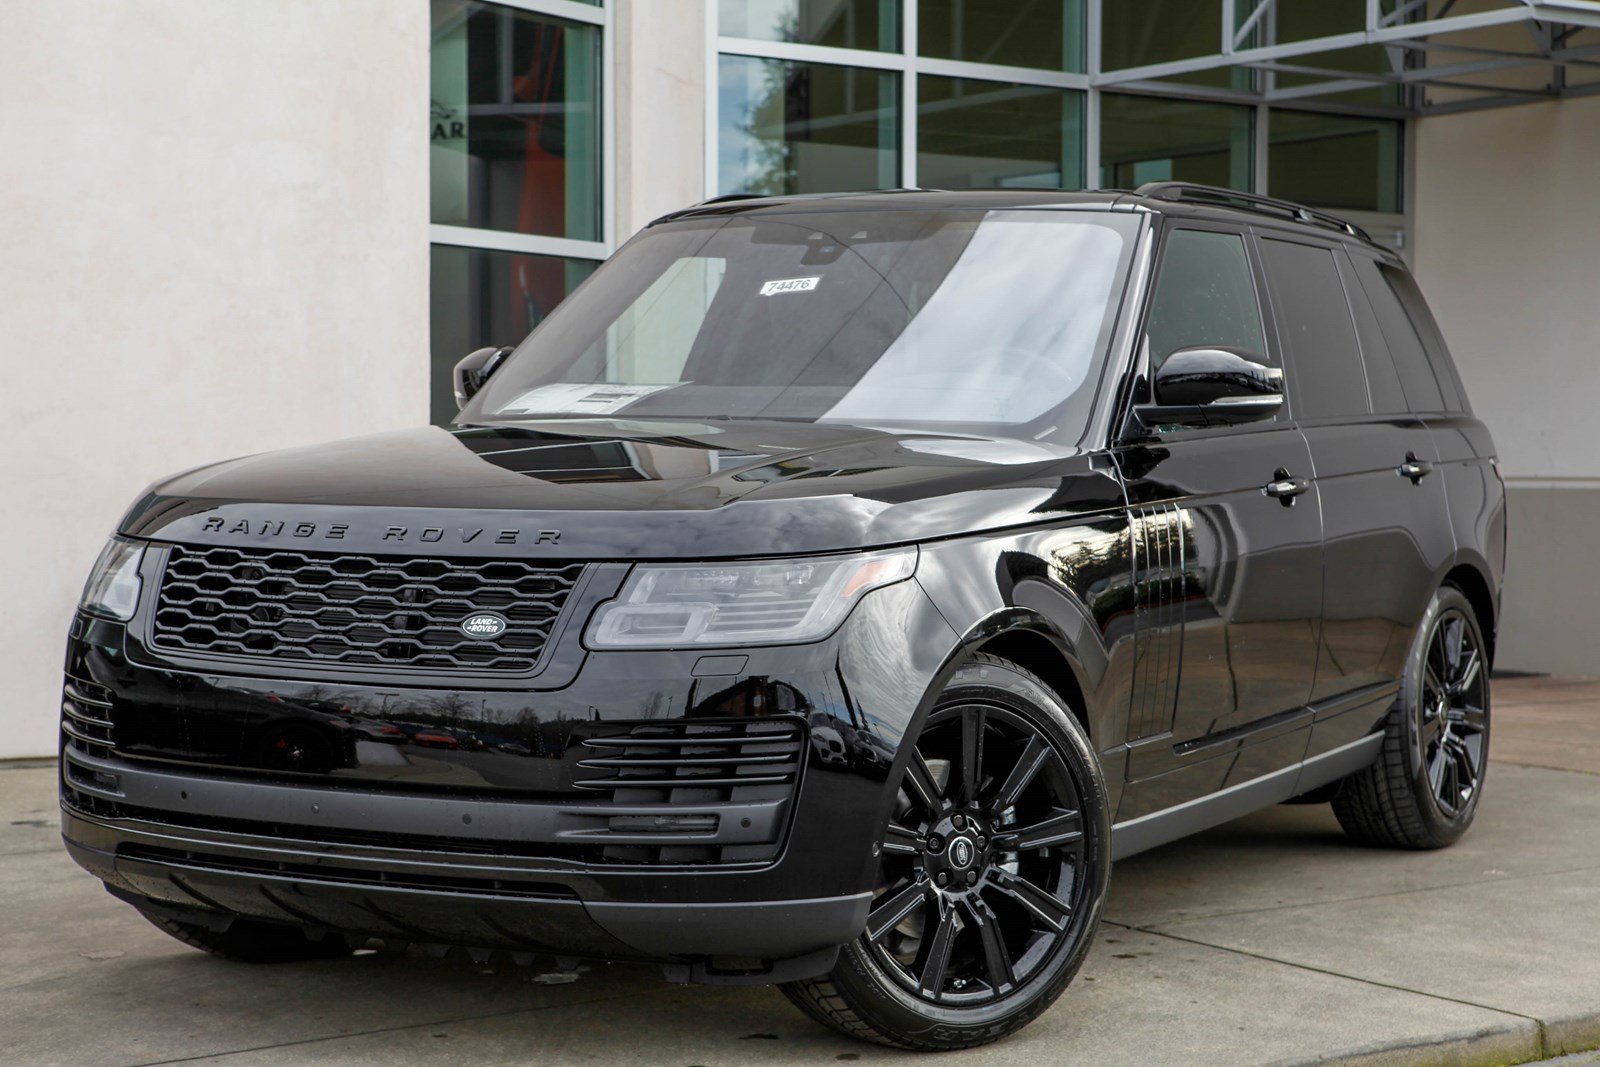 New 2019 Land Rover Range Rover HSE Sport Utility in Bellevue 74476 